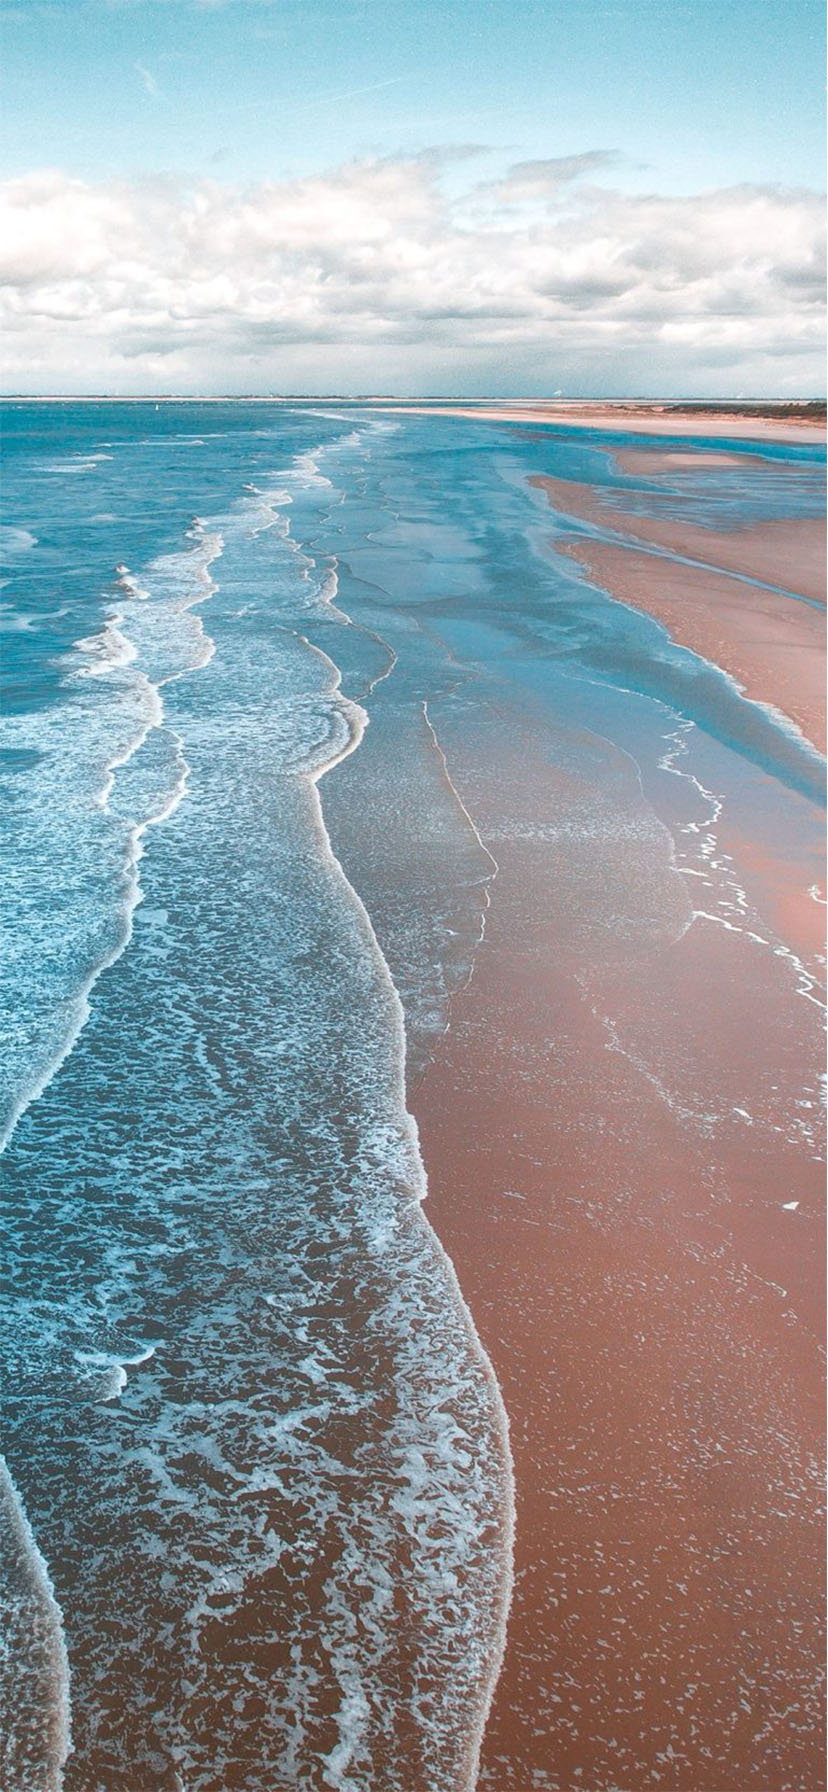 Beach Wallpapers for Phone with Close Up Wave Photo - Allpicts | Ocean  wallpaper, Nature iphone wallpaper, Iphone wallpaper ocean